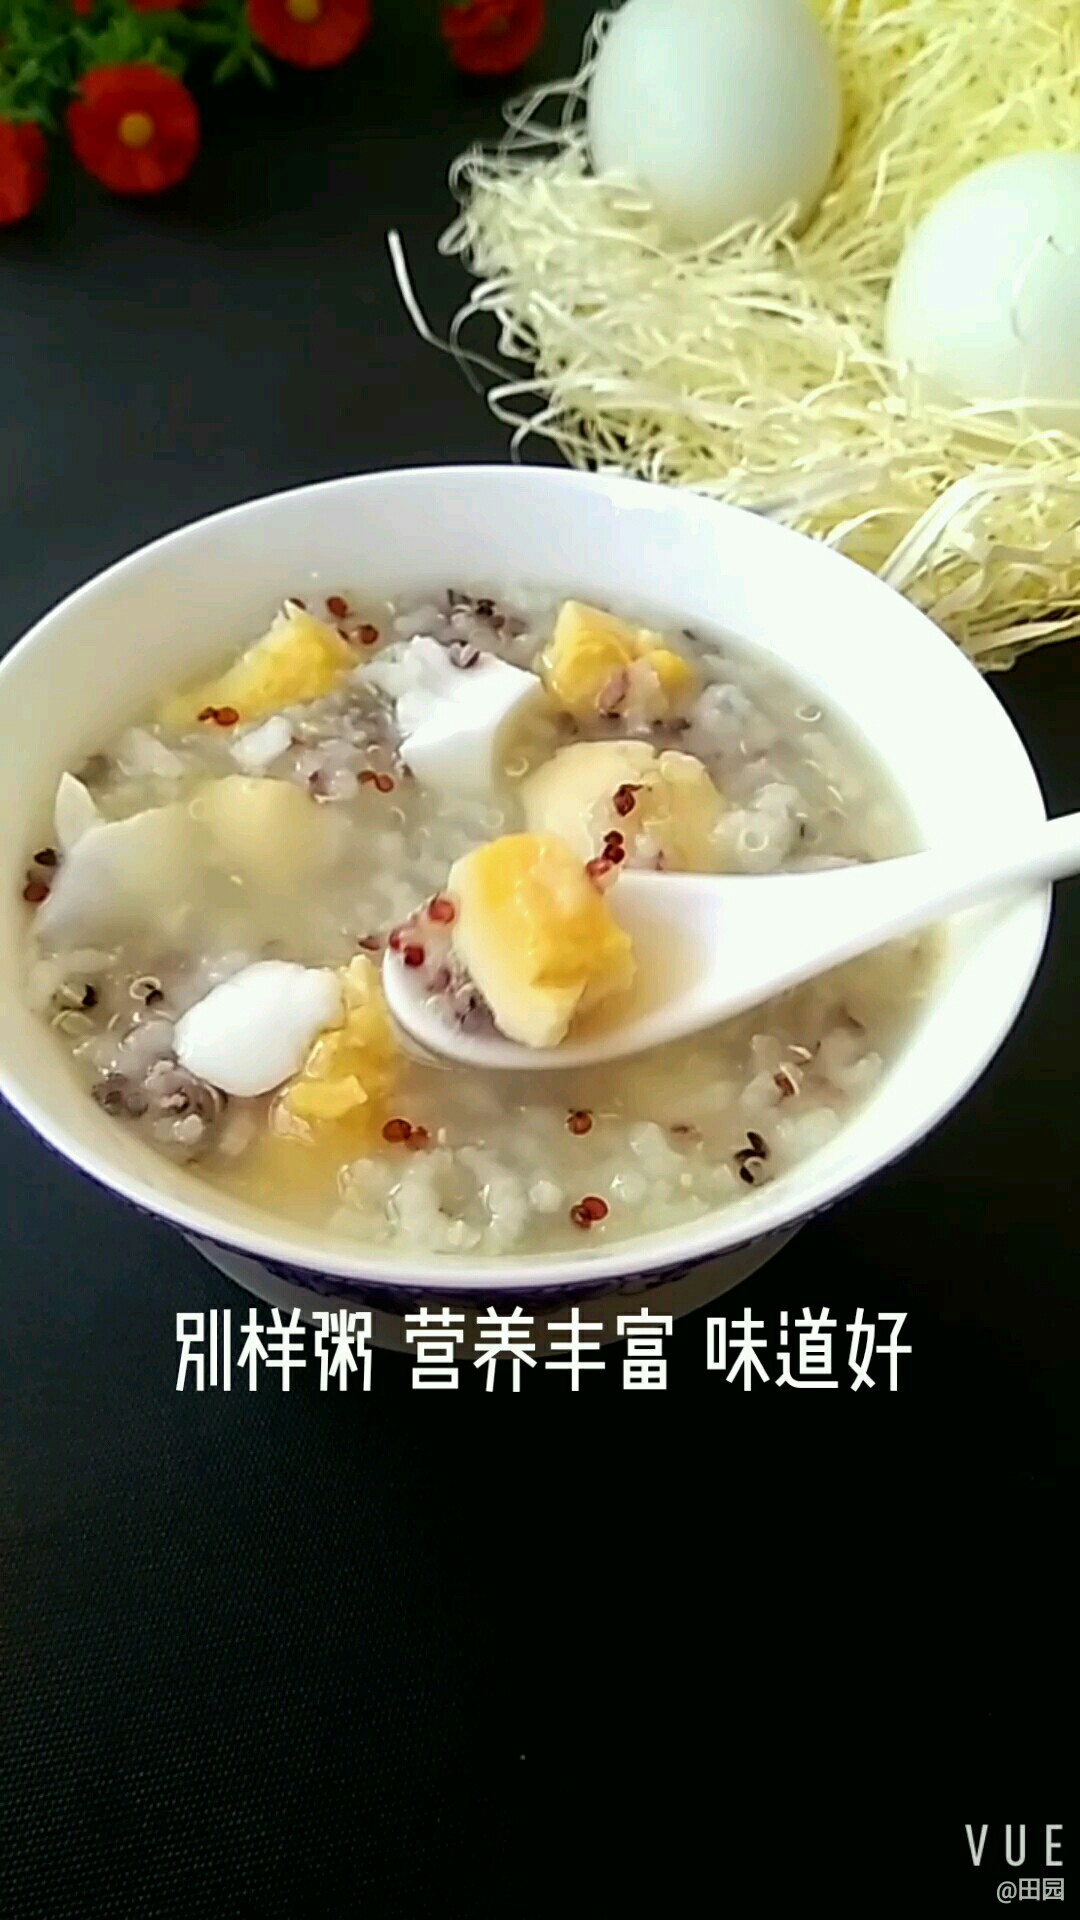 Different Kind of Porridge is Nutritious and Tastes Good recipe